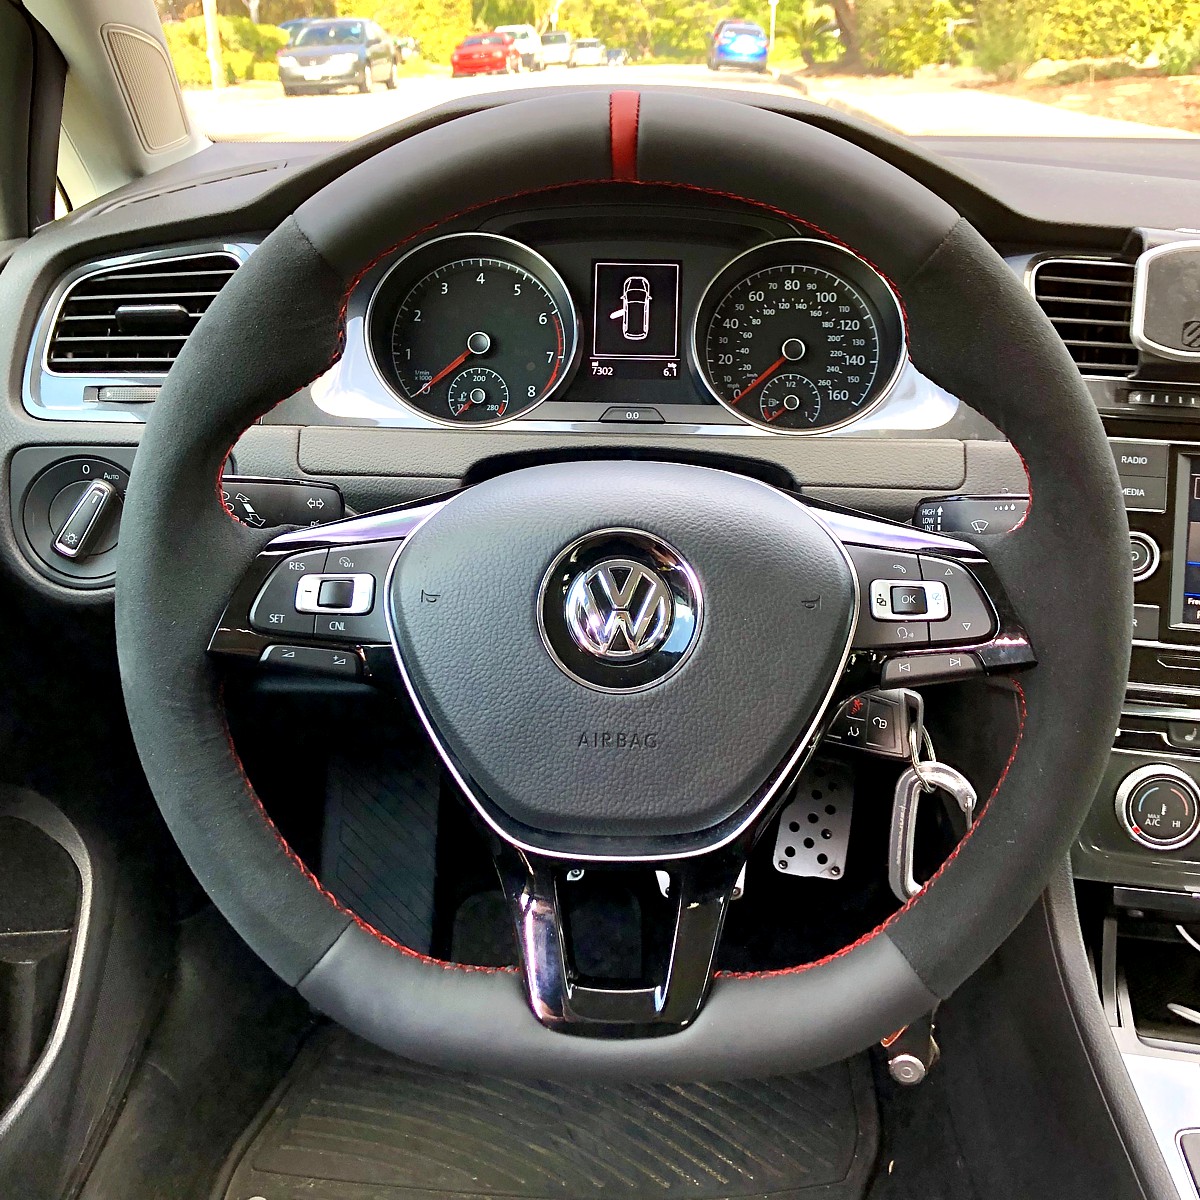 Steering wheel cover with stripes